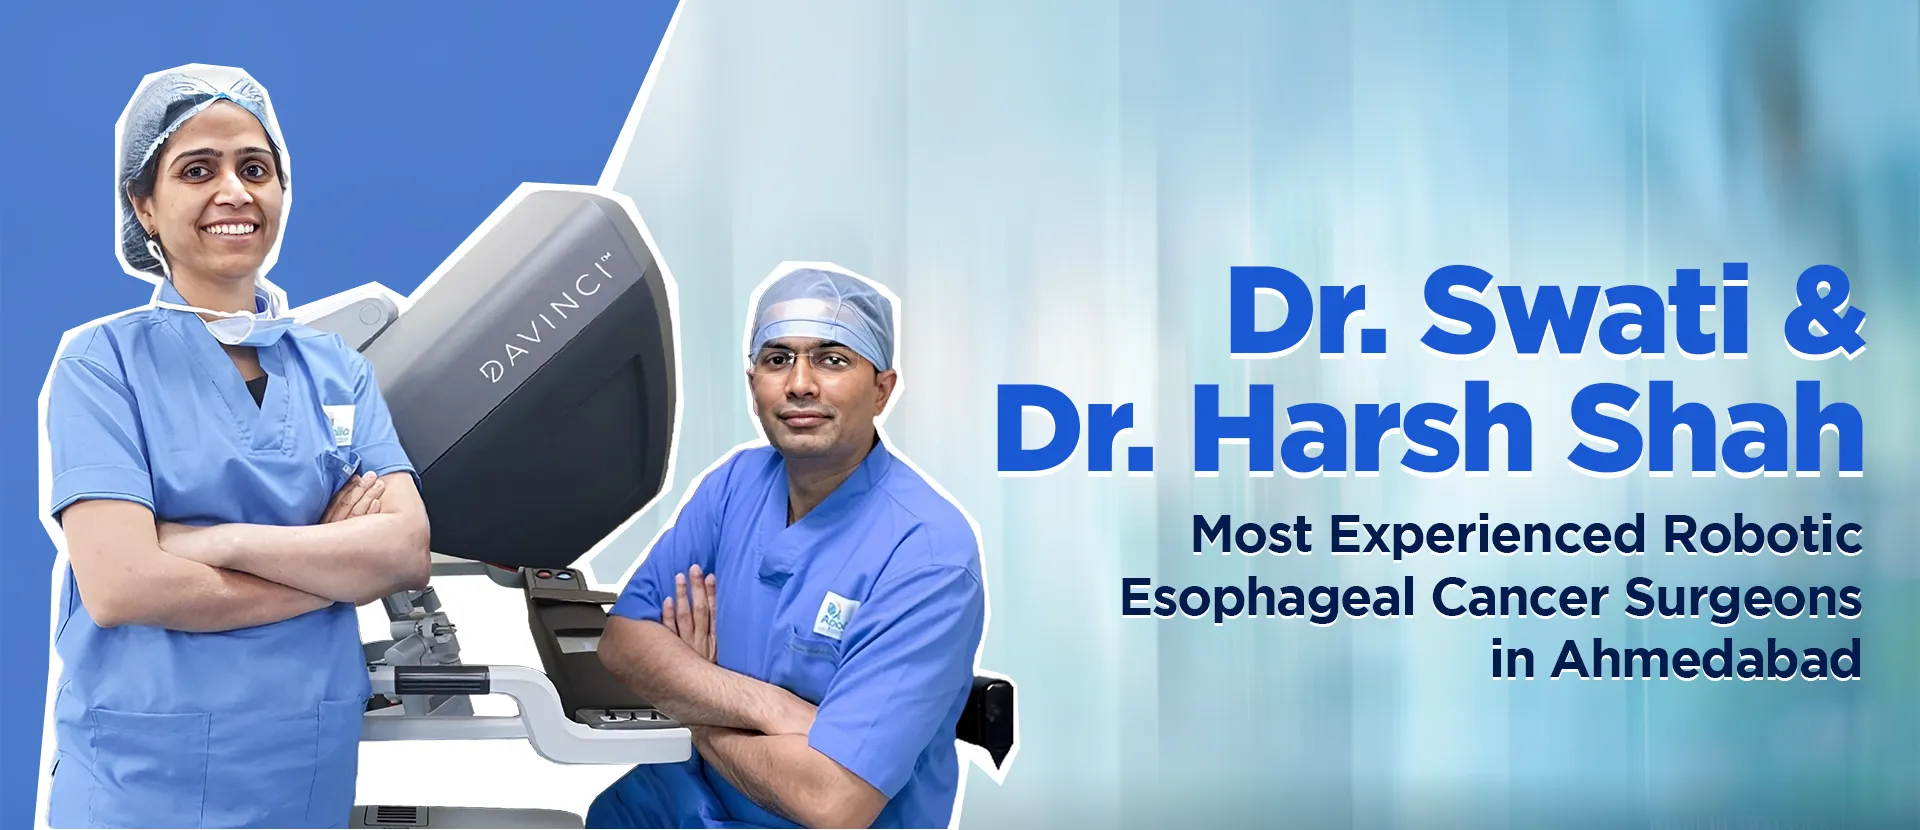 Best Esophageal cancer Treatment with Robotic Surgery in Ahmedabad, Gujarat, India